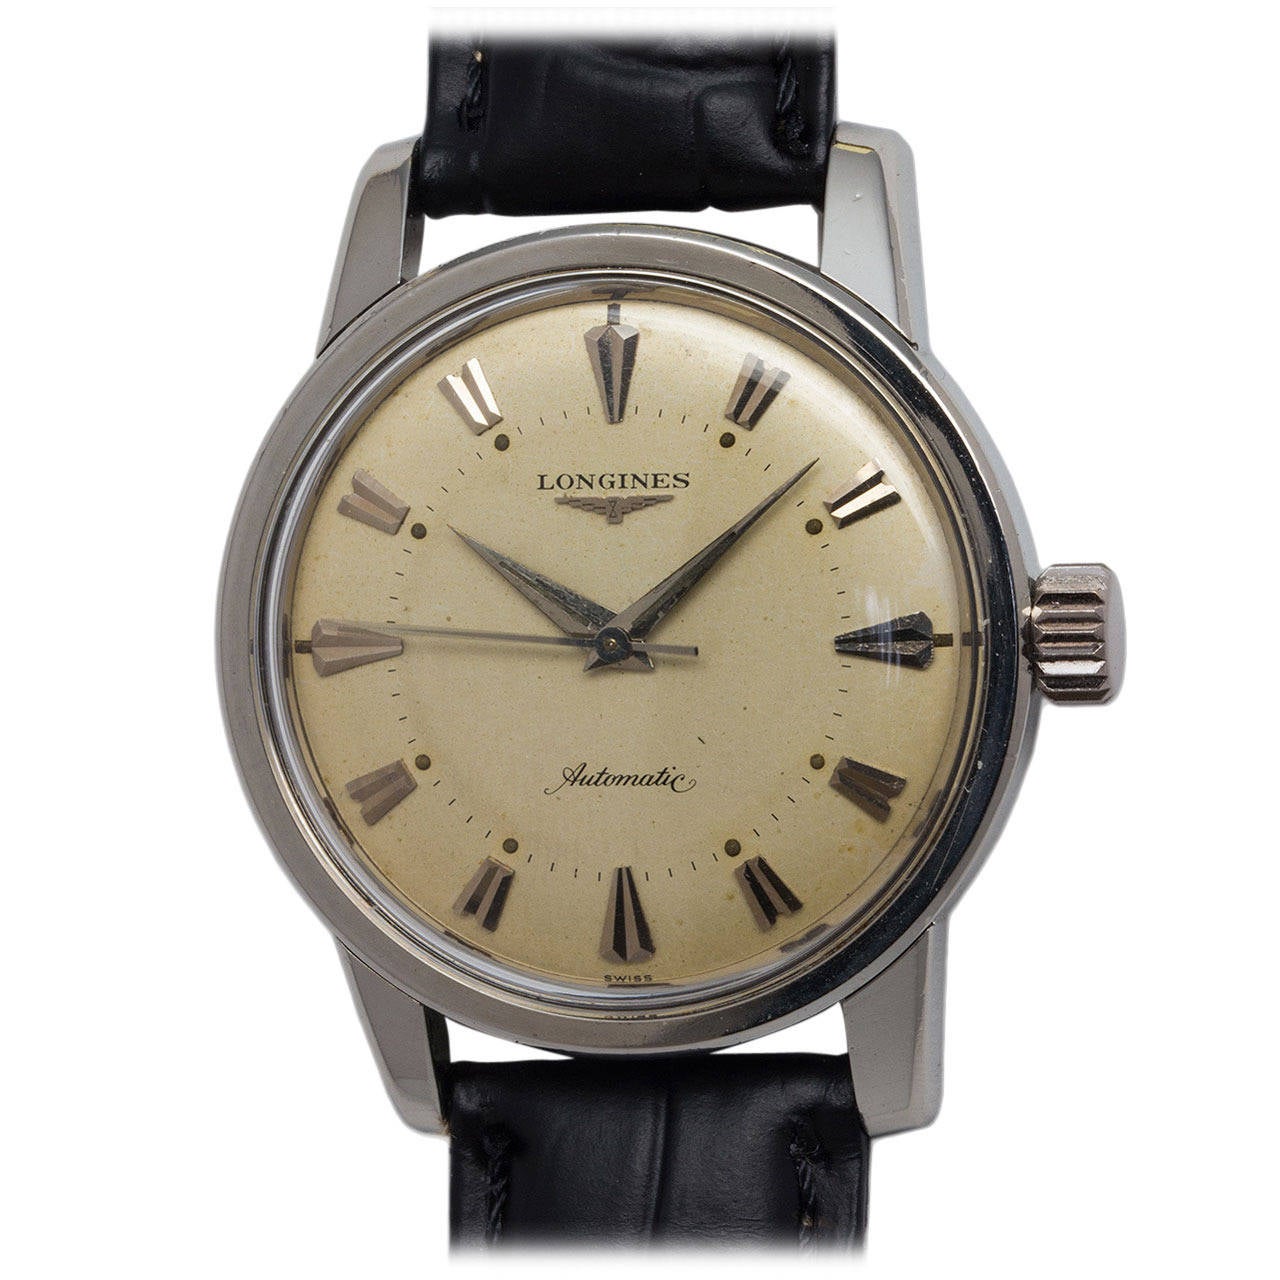 Longines Stainless Steel Automatic Wristwatch circa 1950s